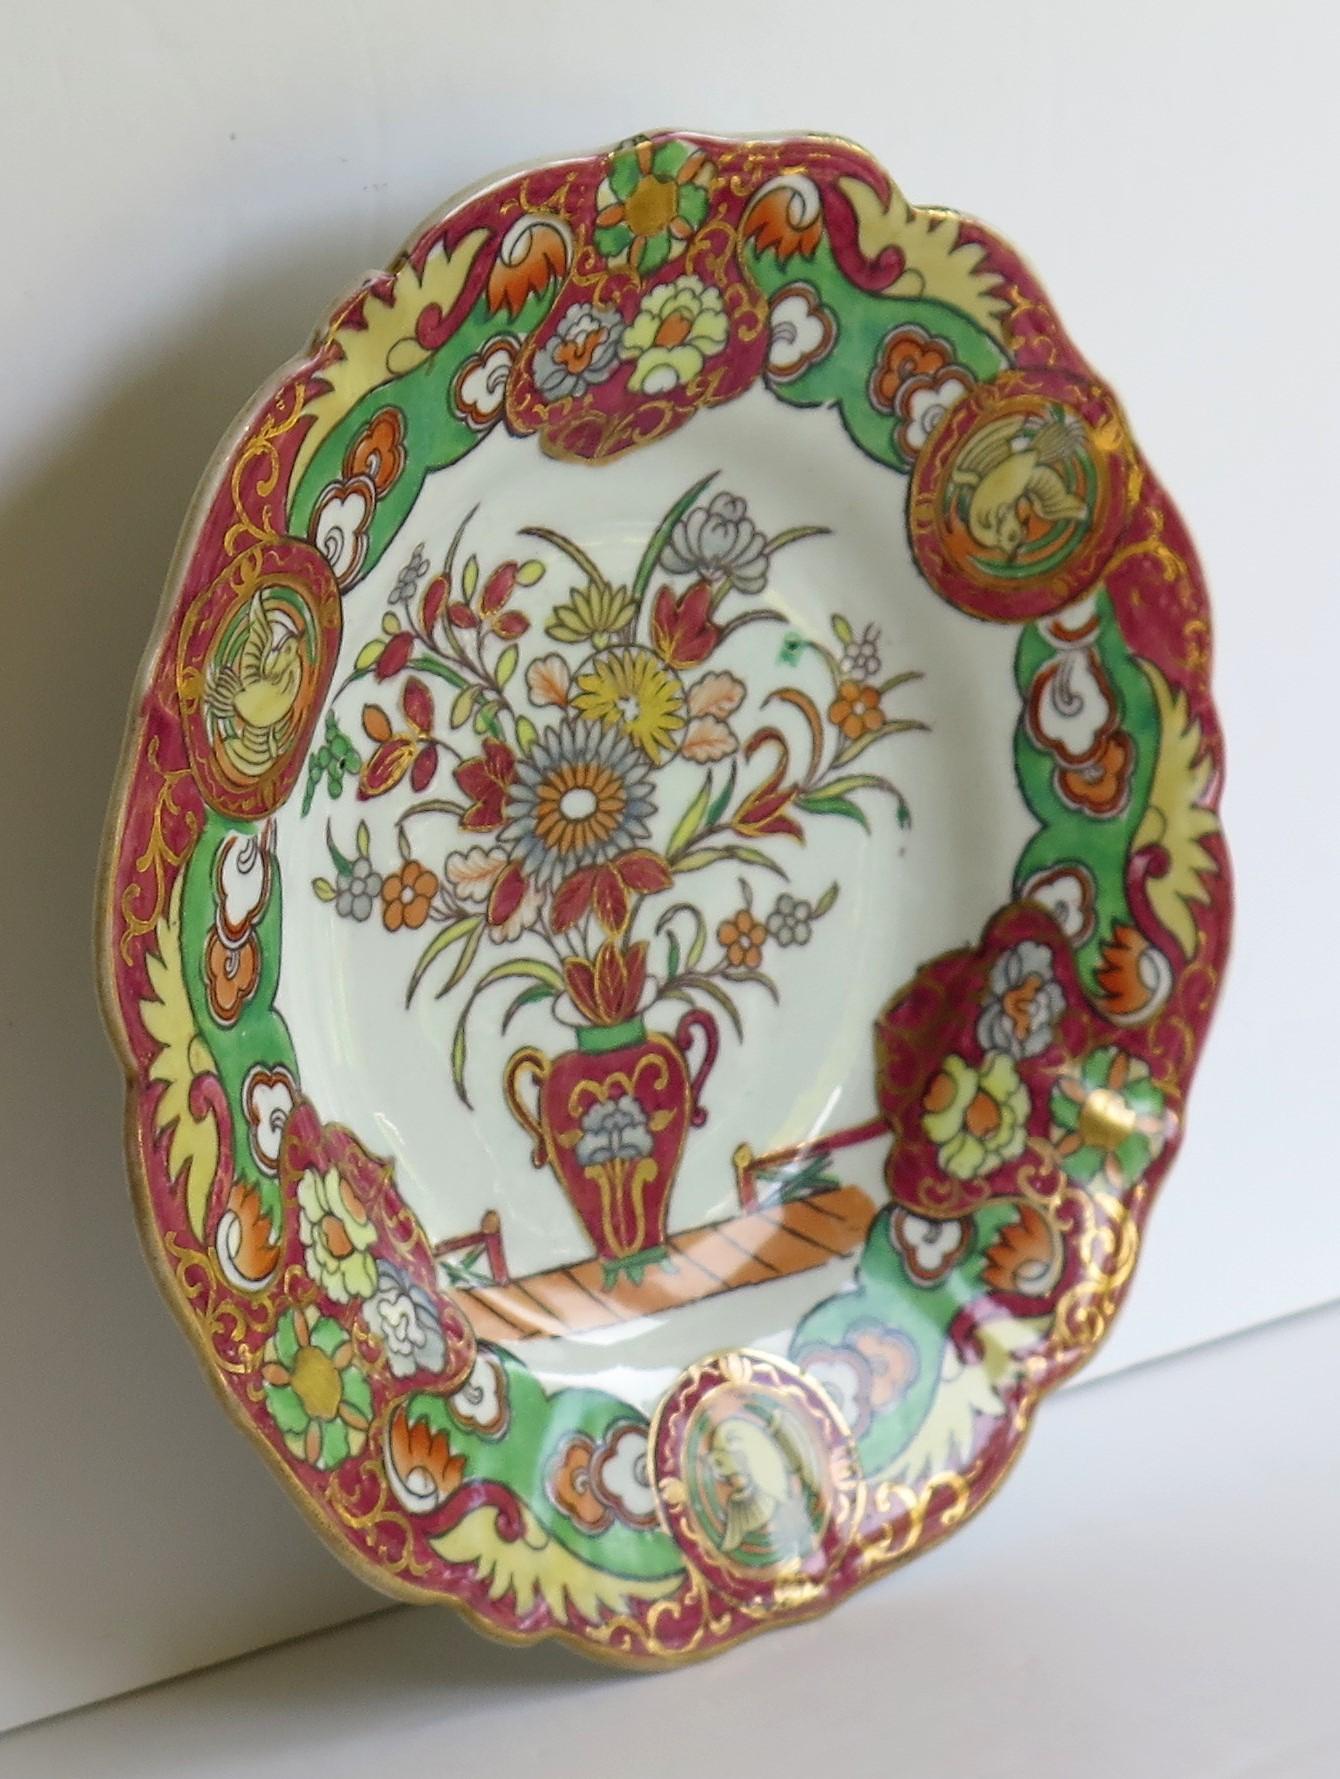 Hand-Painted Mason's Ironstone Desert Dish or Plate in Fence Vase and Doves Pattern, Ca 1830